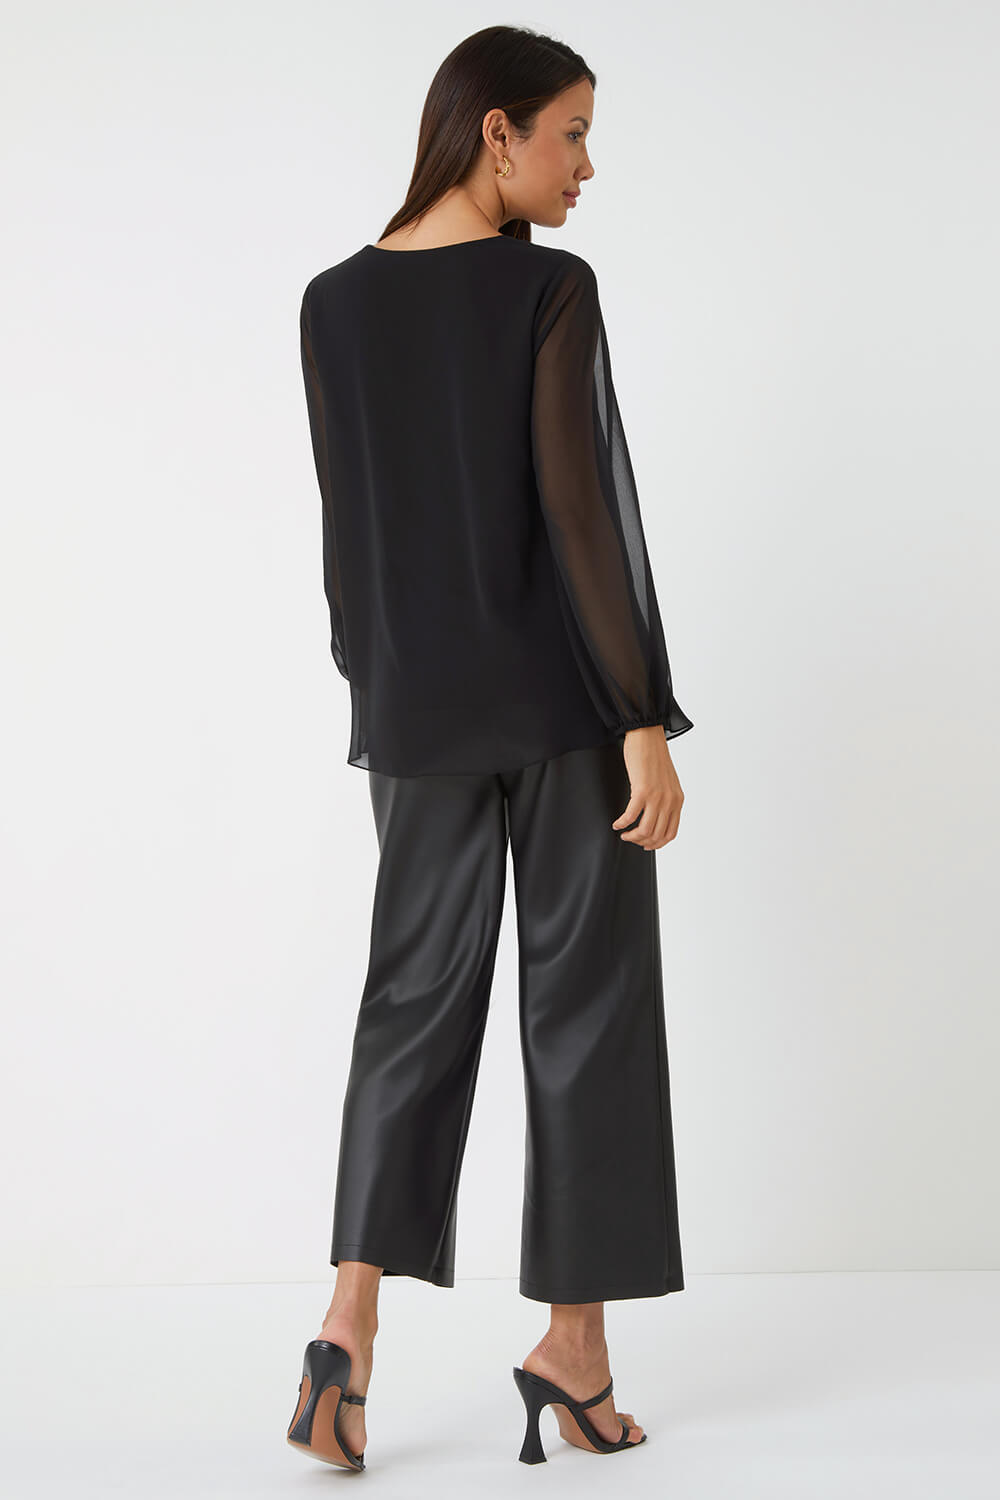 Black Contrast Chiffon Overlay Stretch Top, Image 3 of 5